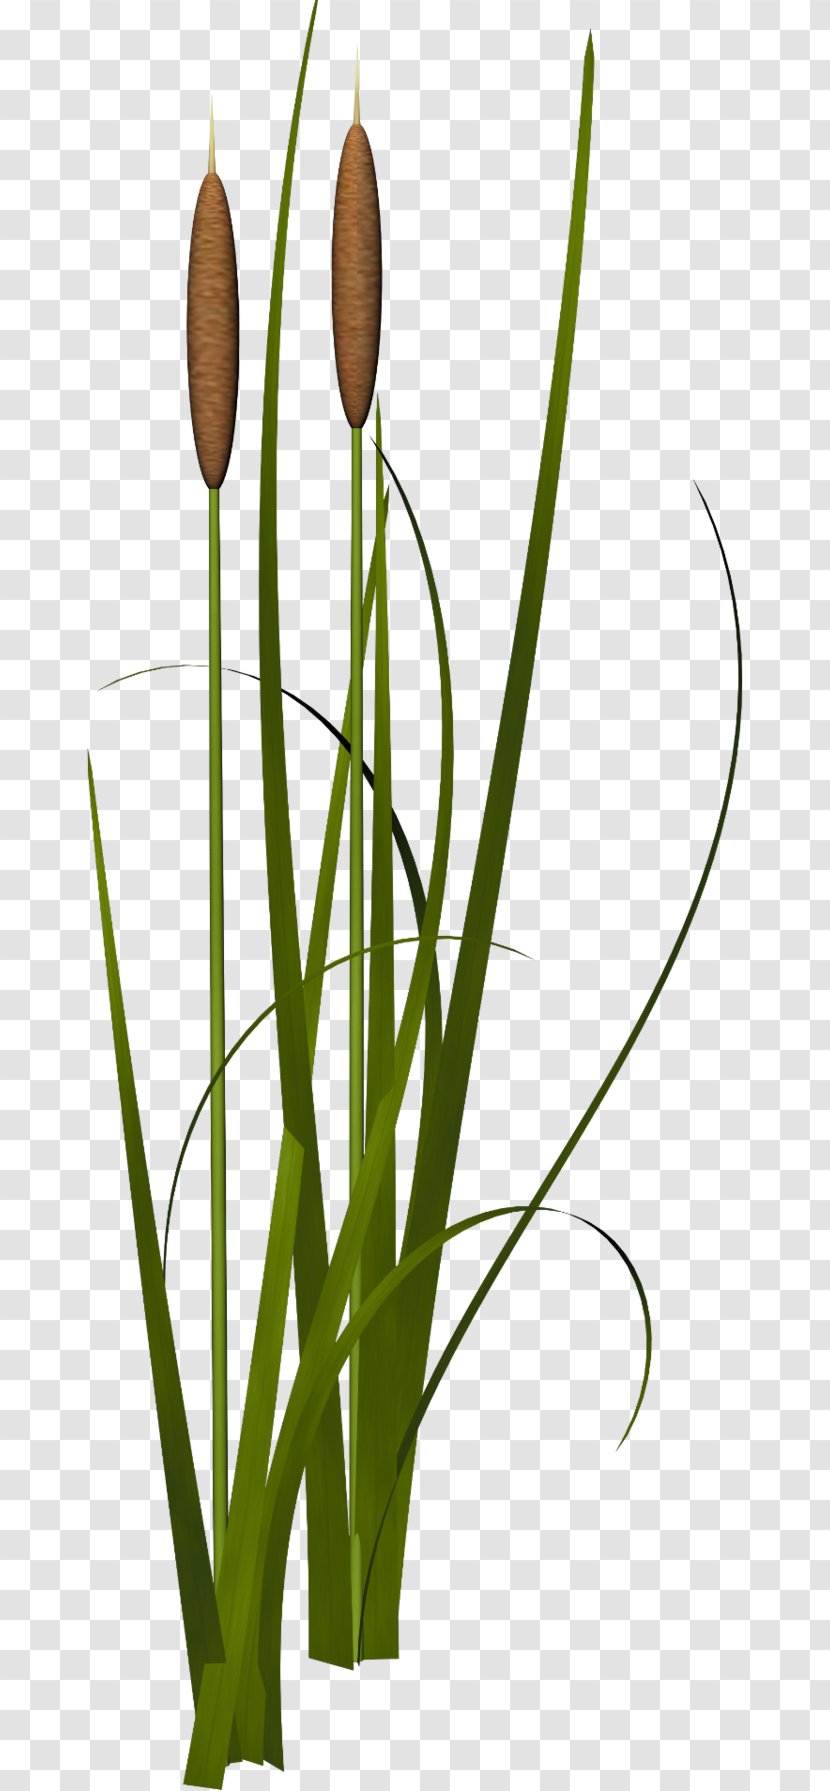 Reed Icon - Grass - Grass,leaf,green,reed Transparent PNG